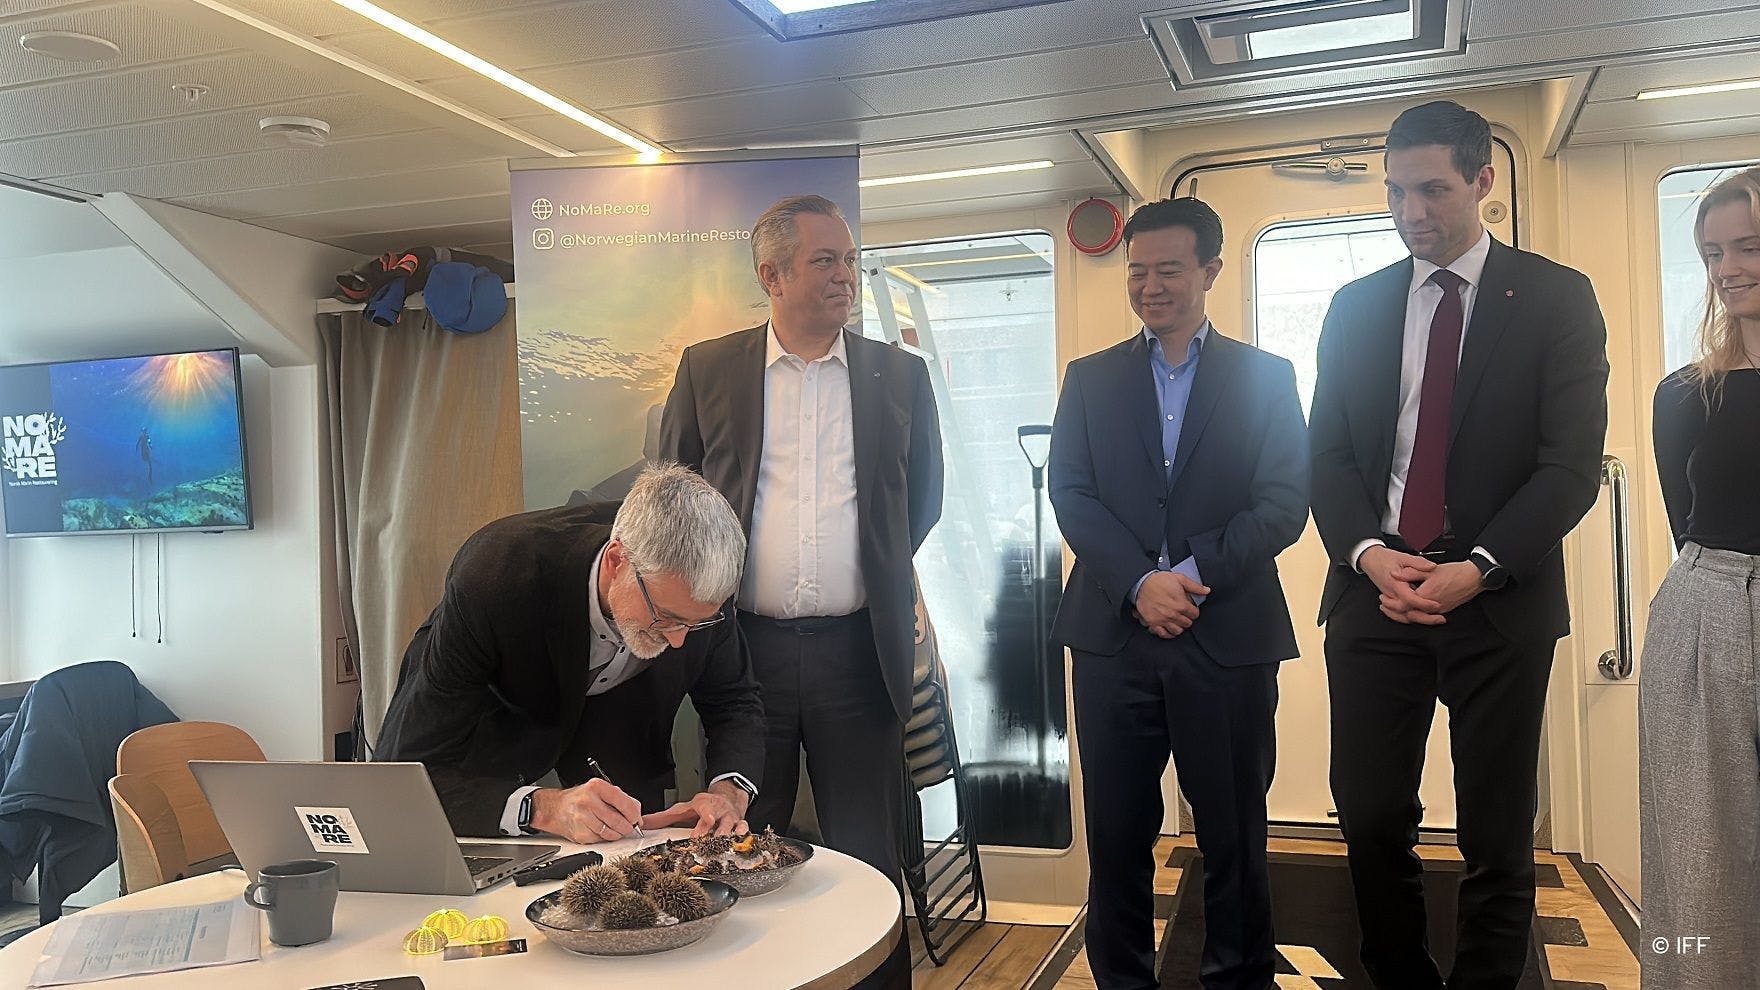 Trond Helgerud signs Norwegian Marine Restoration Project agreement along with Joakim Hauge from Bellona NGO; Brian Tsuyoshi Takeda, founder of Urchinomics; Andreas Bjelland Eriksen, Norway’s Minister of Climate and Environment, and Ida Søhol, co-leader of Tarevoktere. Image courtesy of IFF.